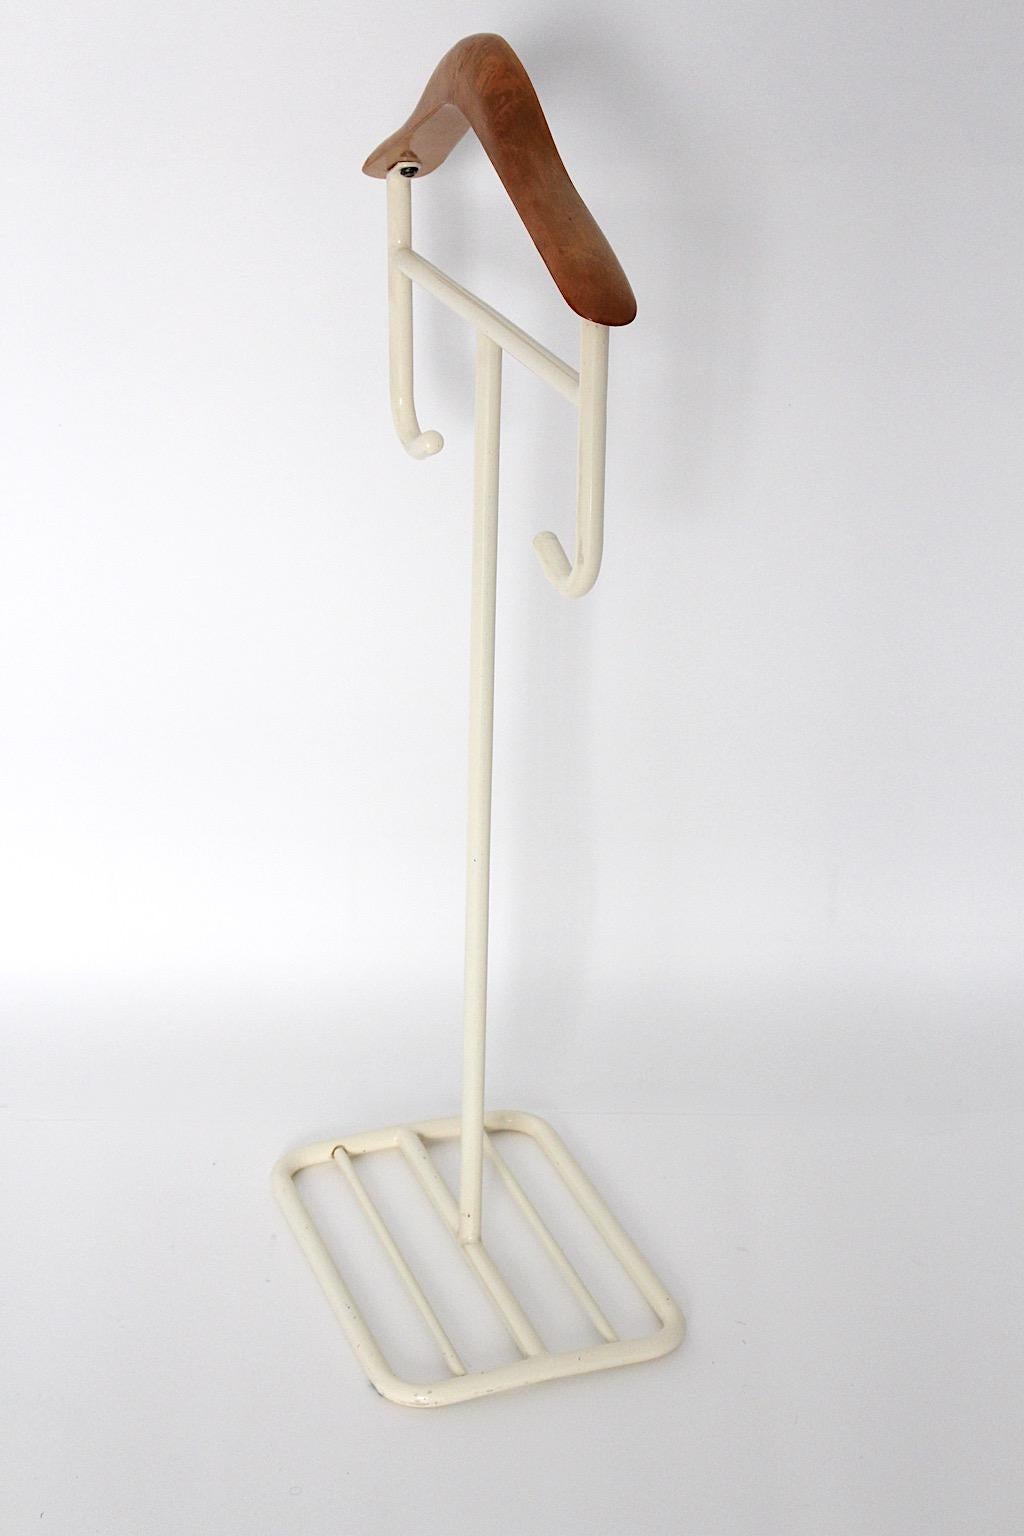 Bauhaus style vintage valet or coat rack from lacquered tube steel and beech in white and brown color circa 1930 Germany.
A sleek and sophisticated valet or coat rack from lacquered metal and beech designed and made circa 1930 Germany.
Throughout